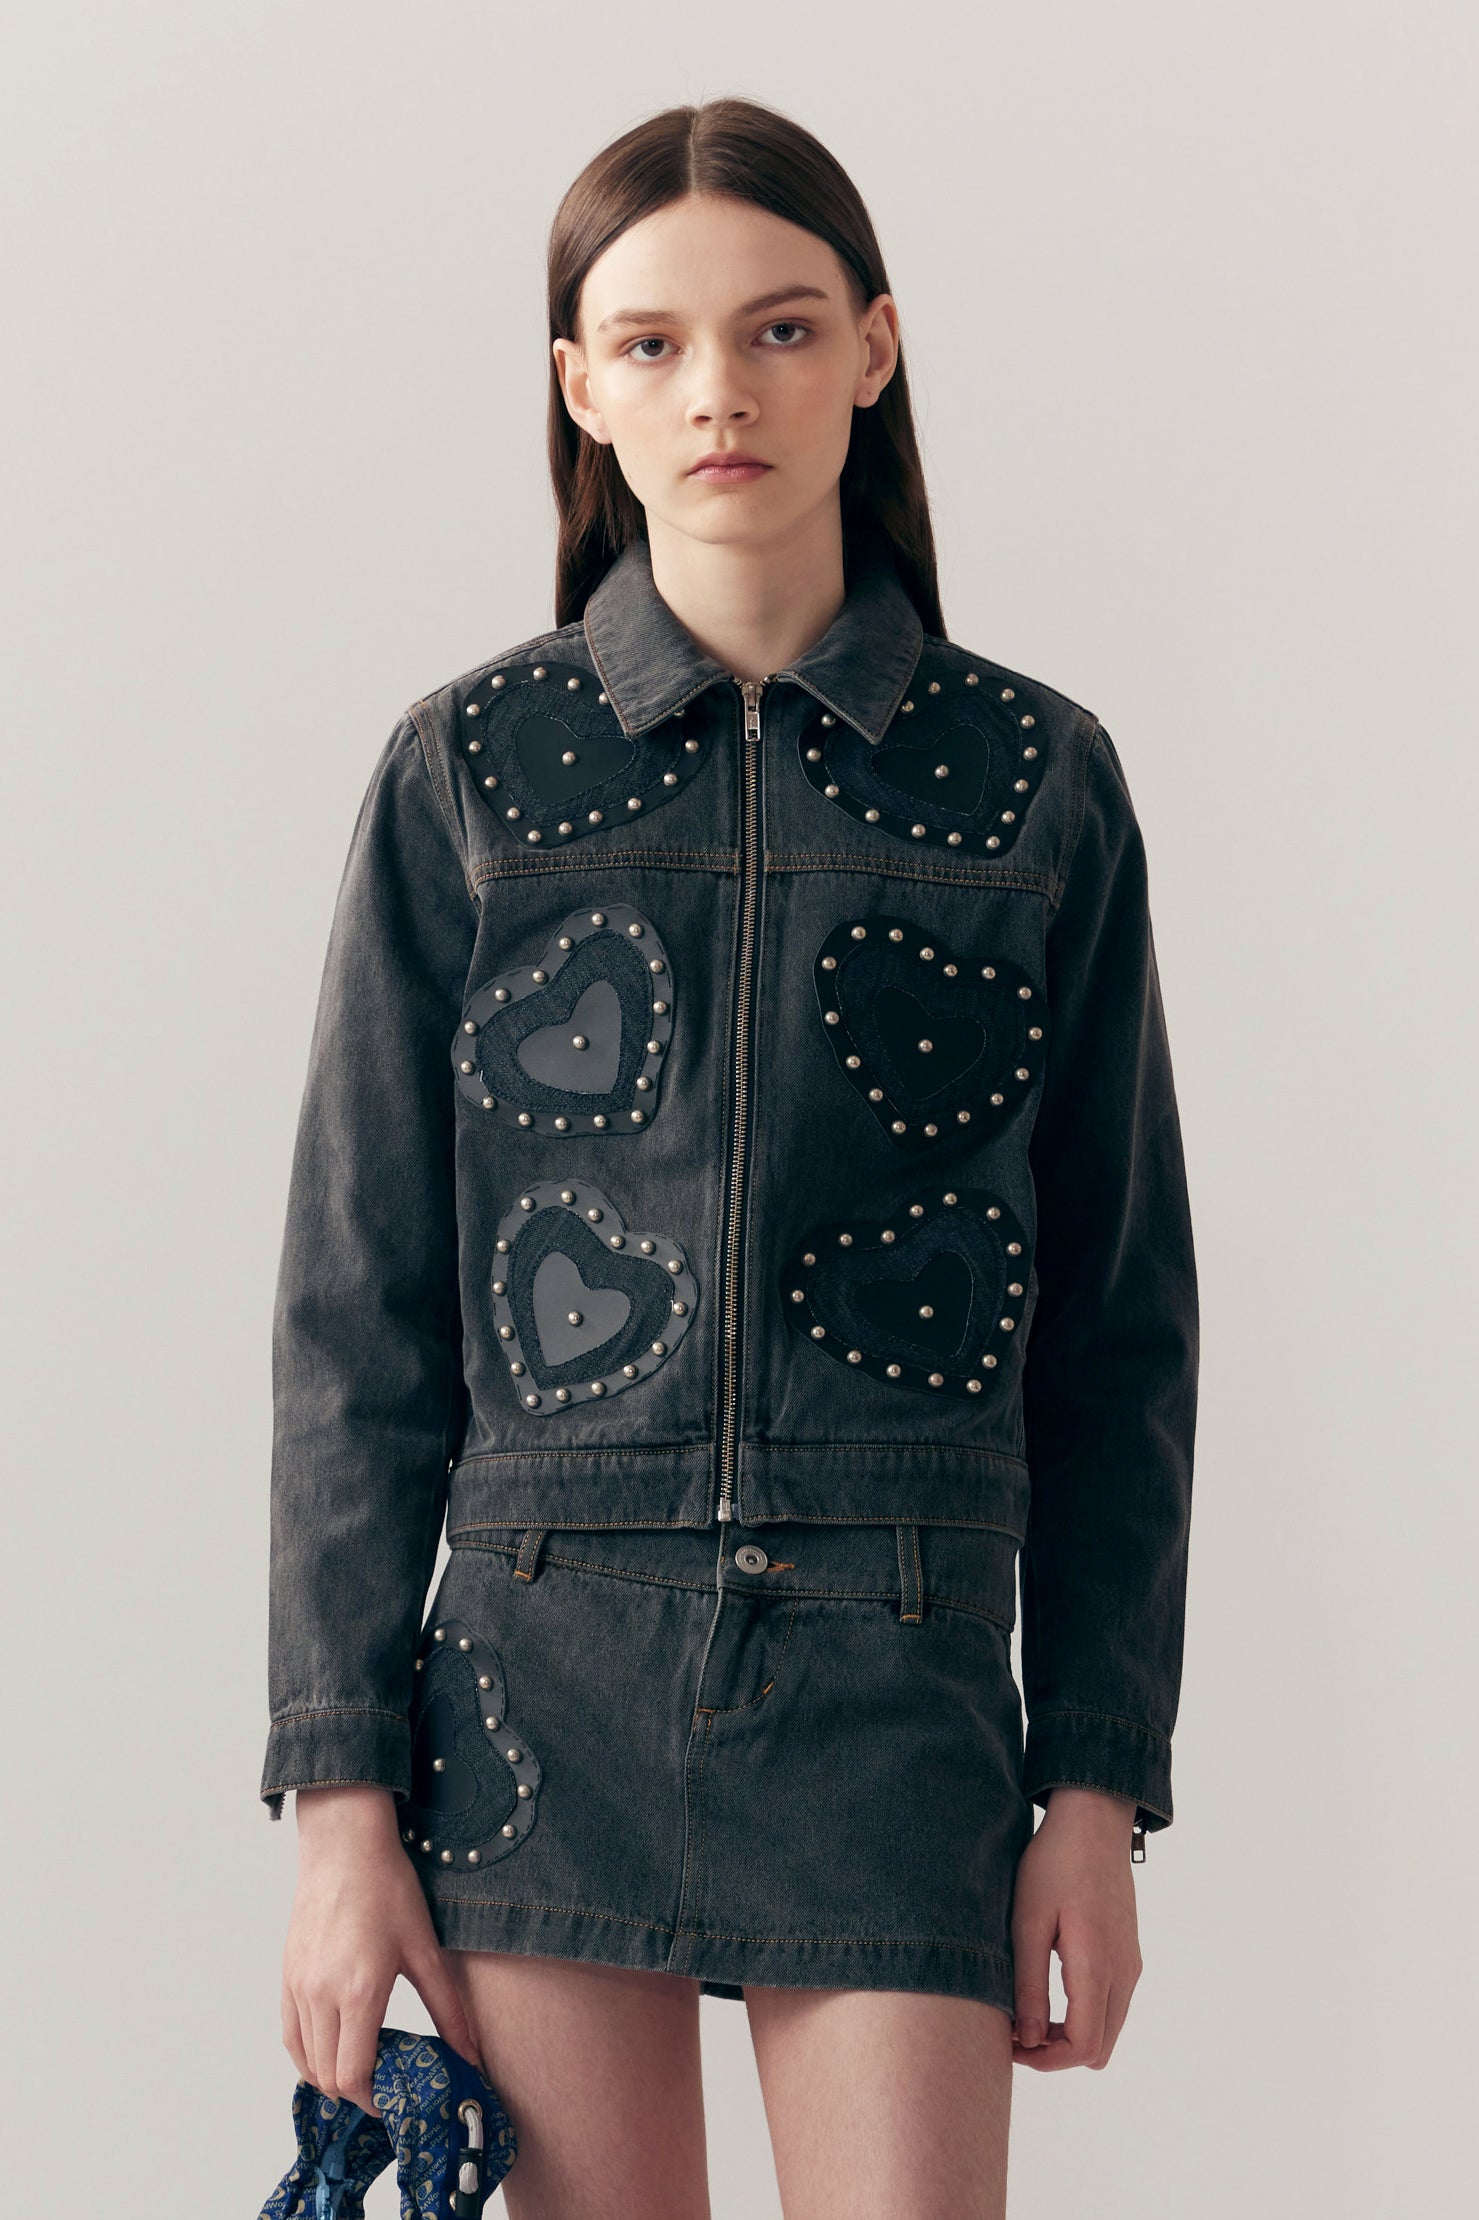 HEARTS PATCH DENIM JACKET – P.A.M. (Perks And Mini)